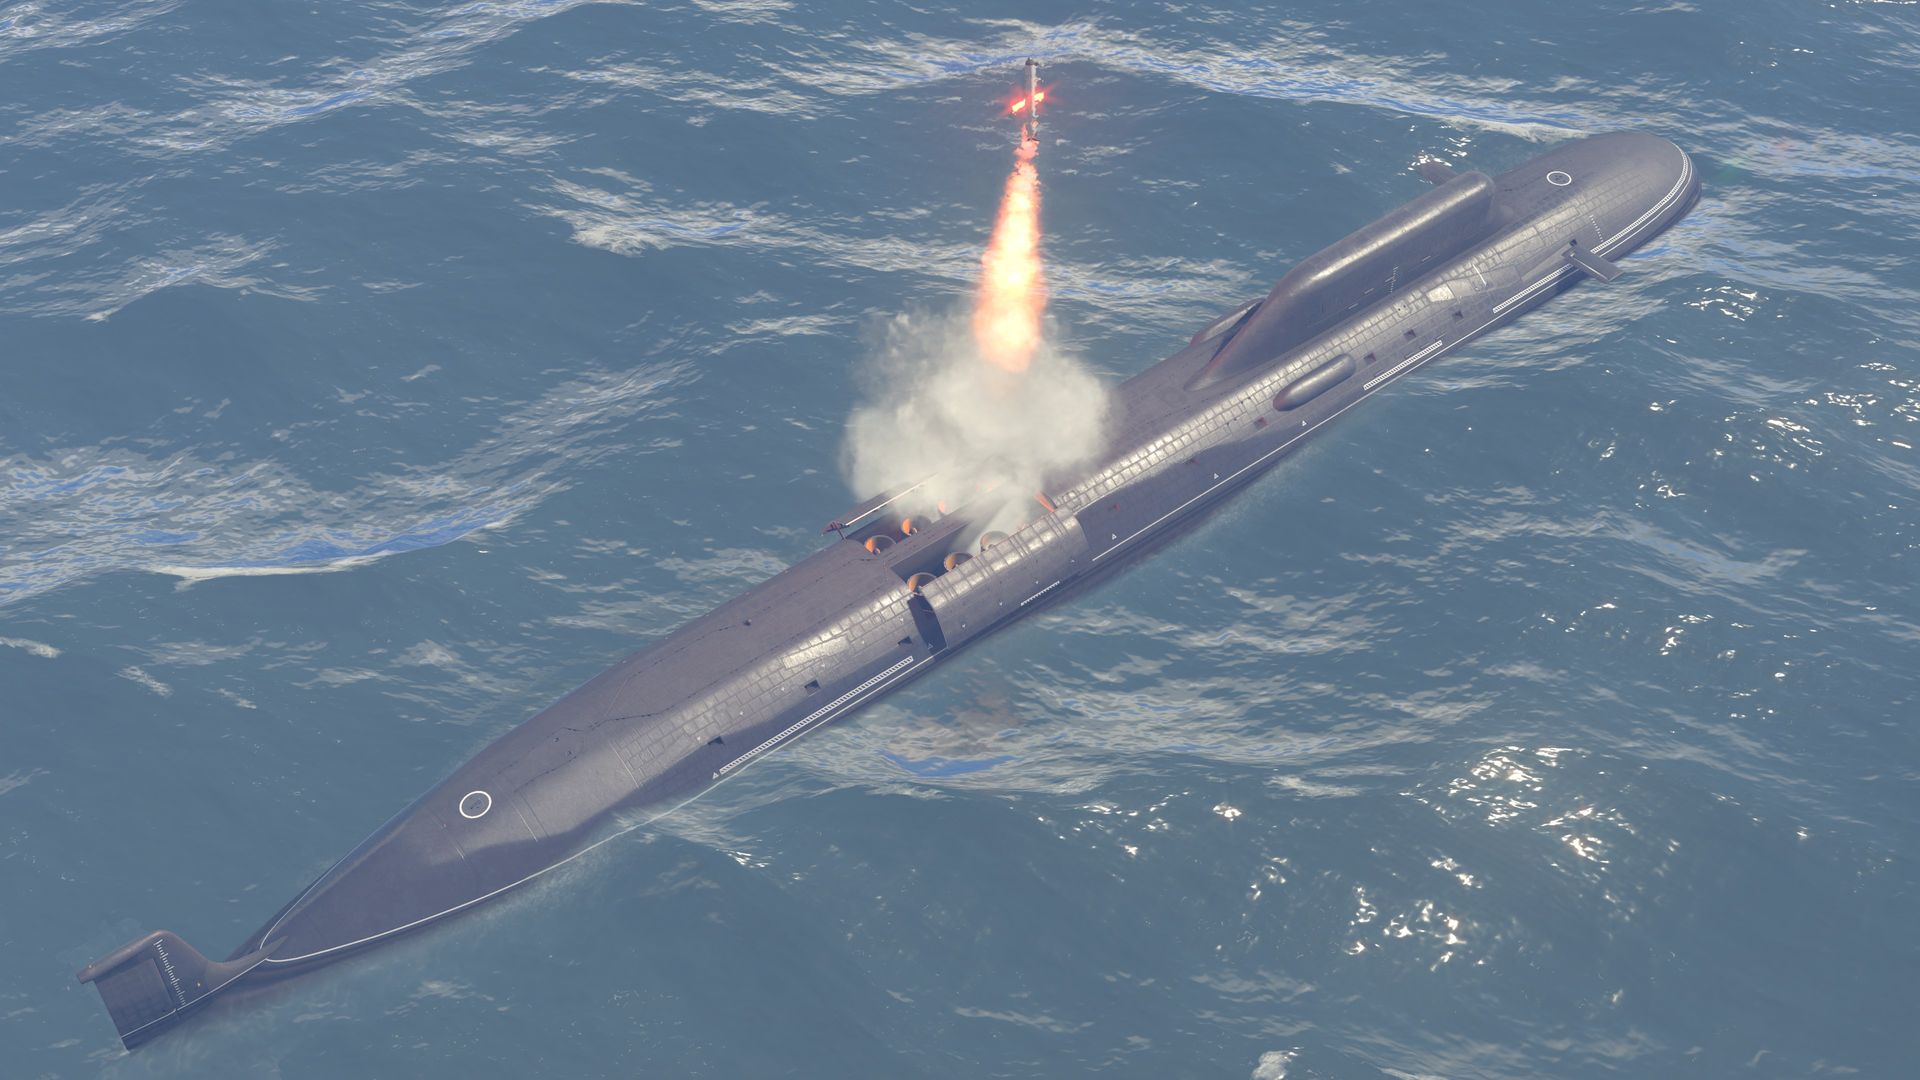 The Authors Of War Thunder Announced Silent Thunder &#8211; Military Online Game About Atomic Submarines